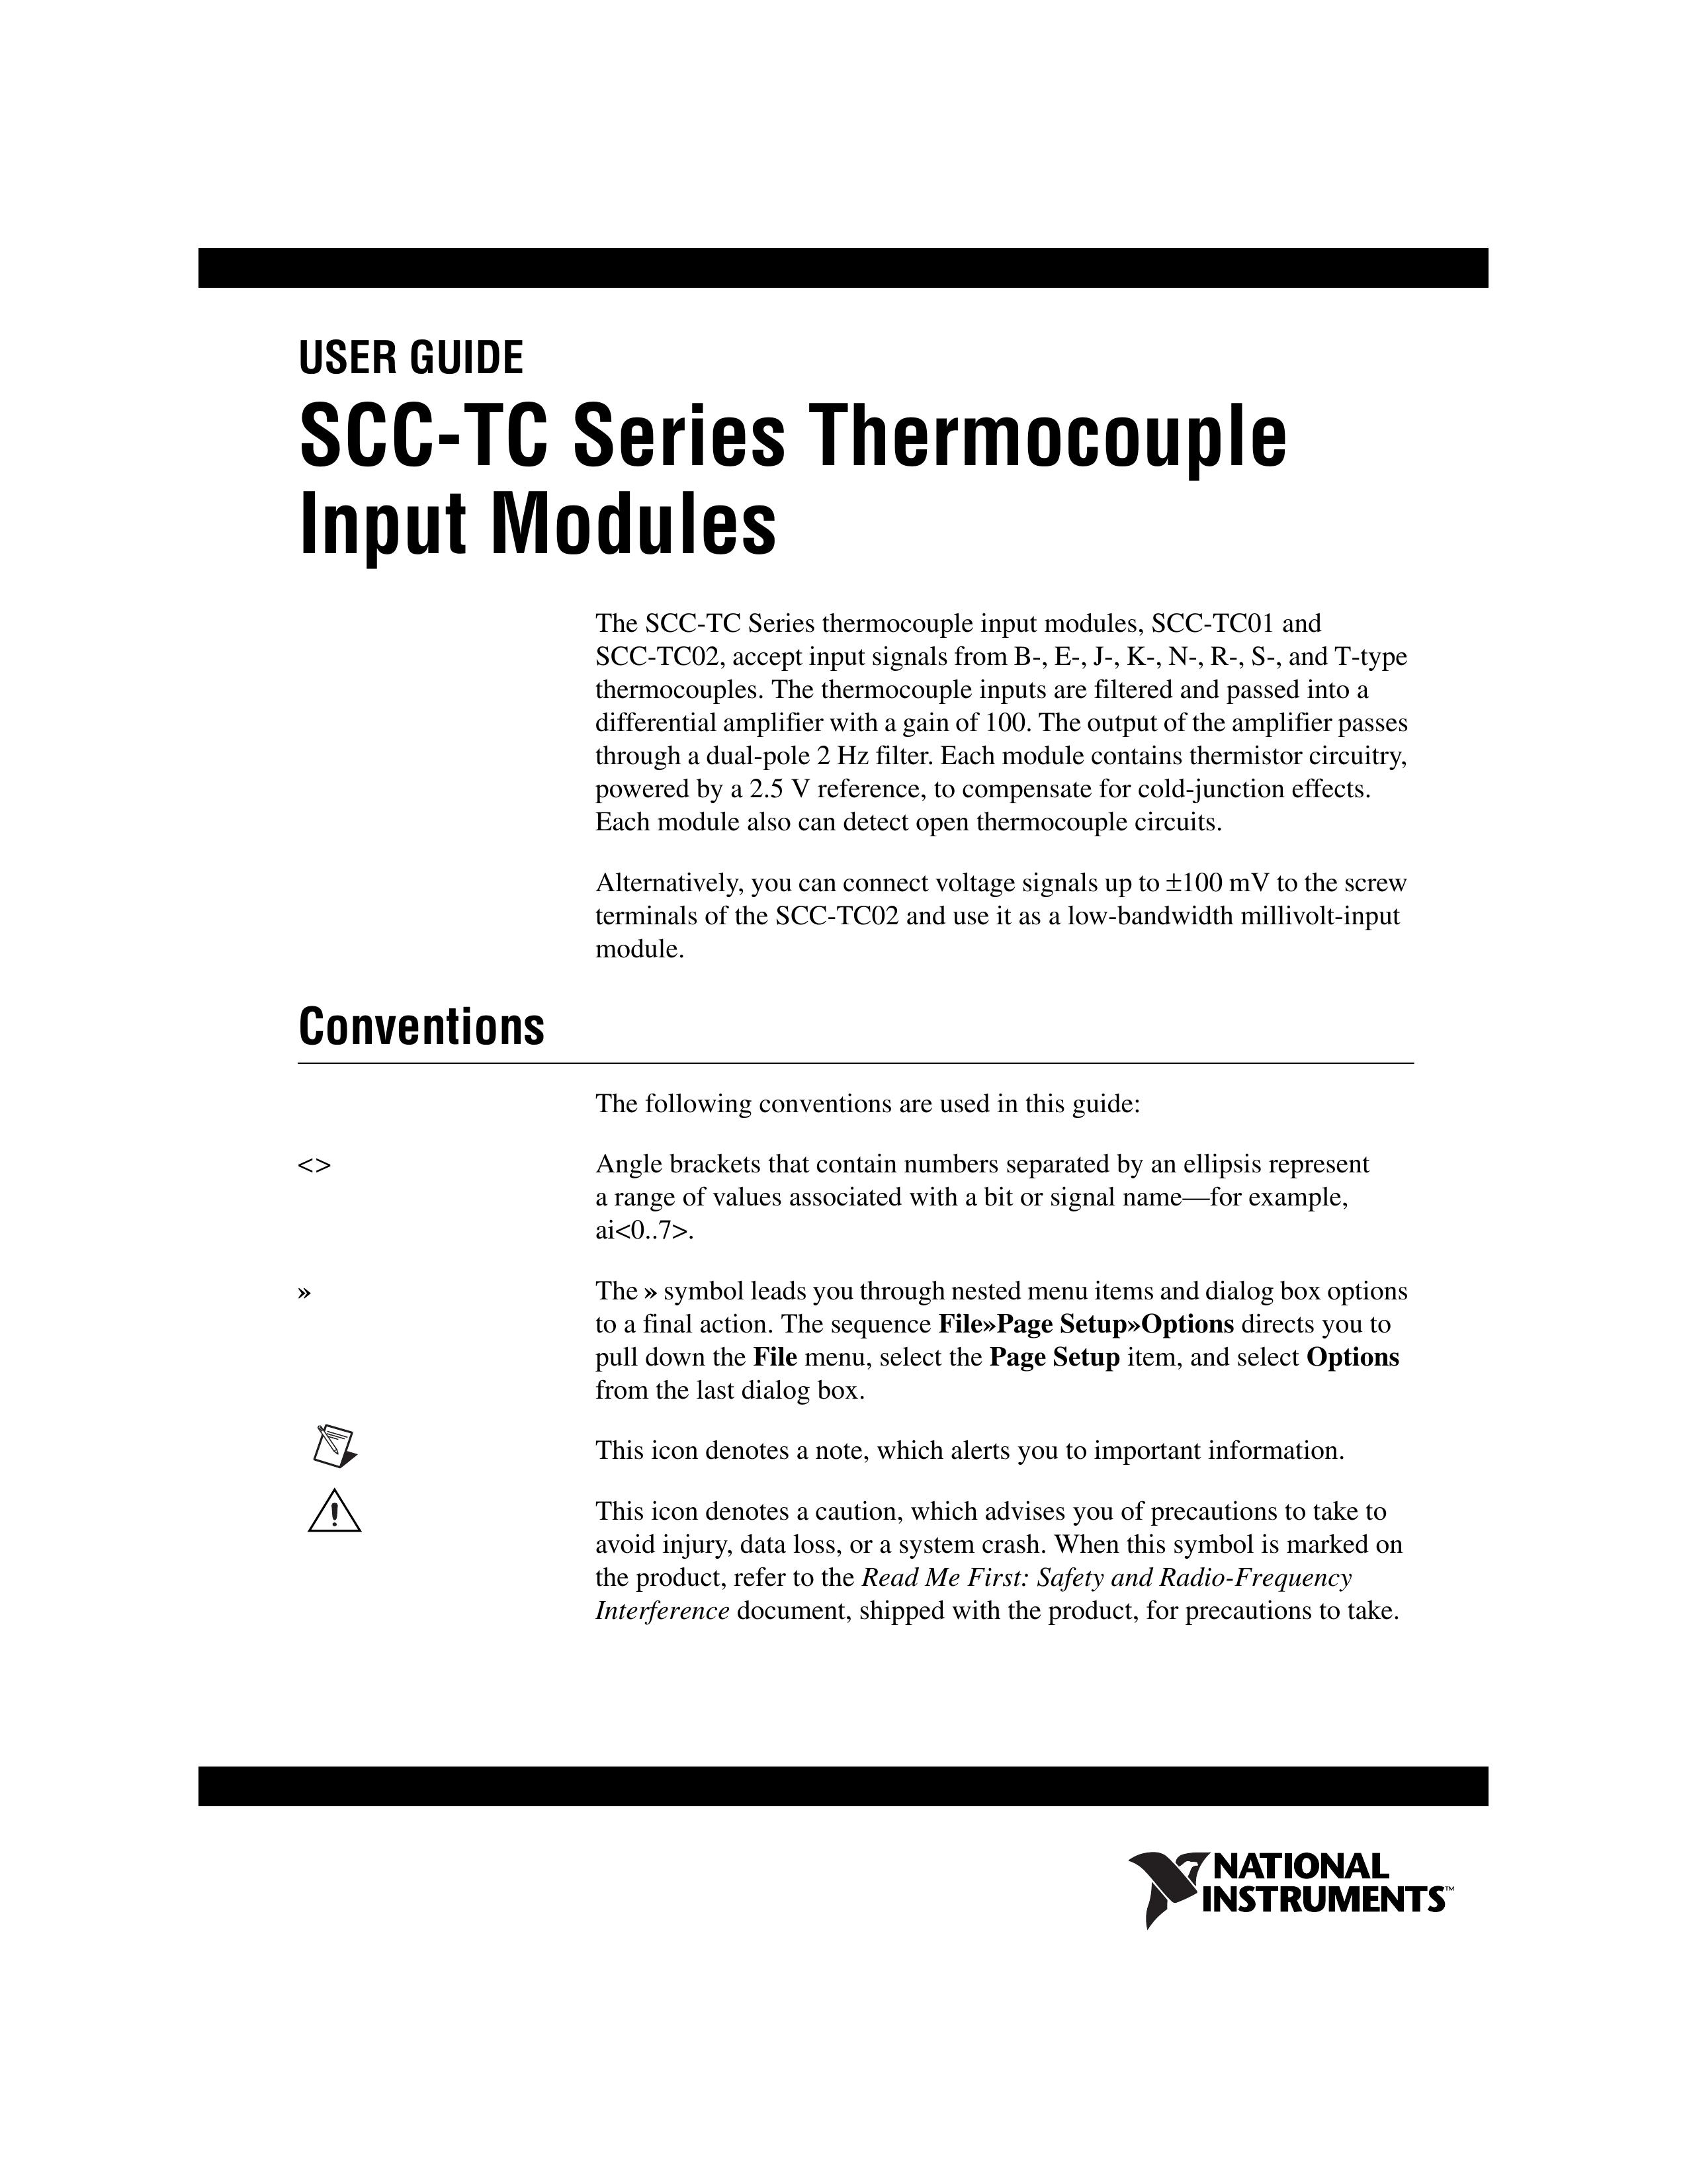 National Instruments SCC-TC01 Thermometer User Manual